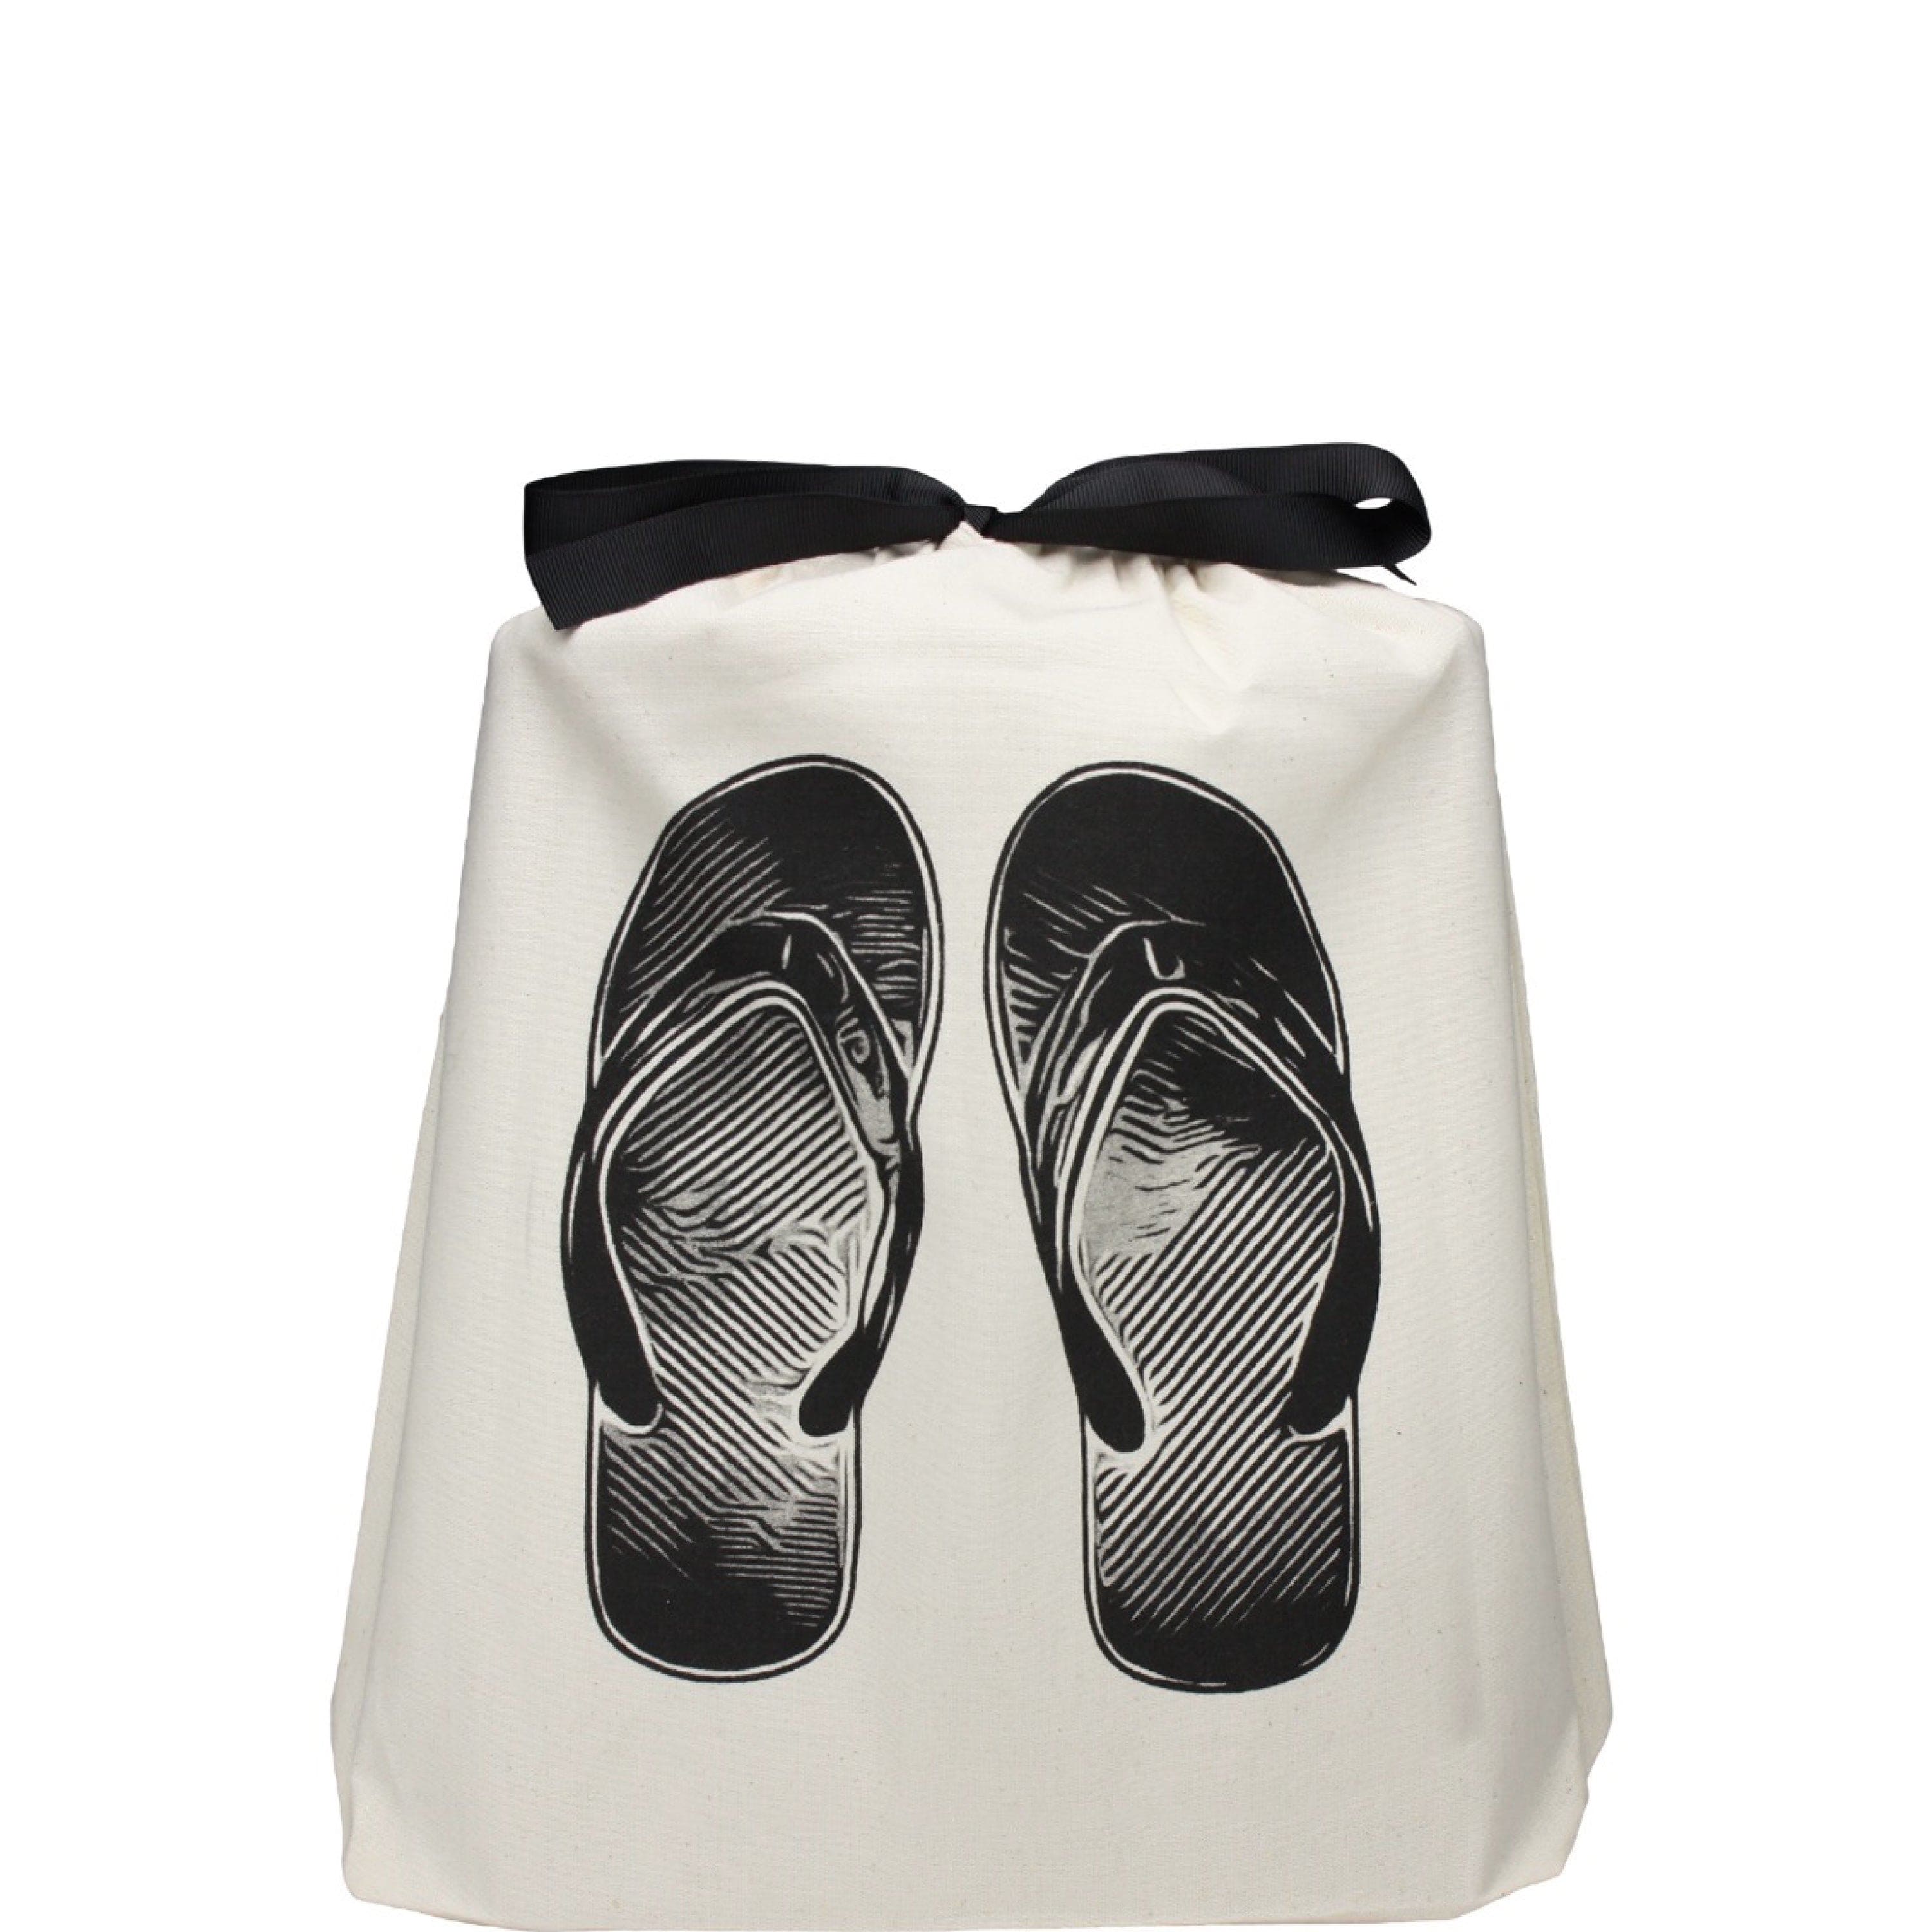 Shoe bag with flip flops printed on the front. 